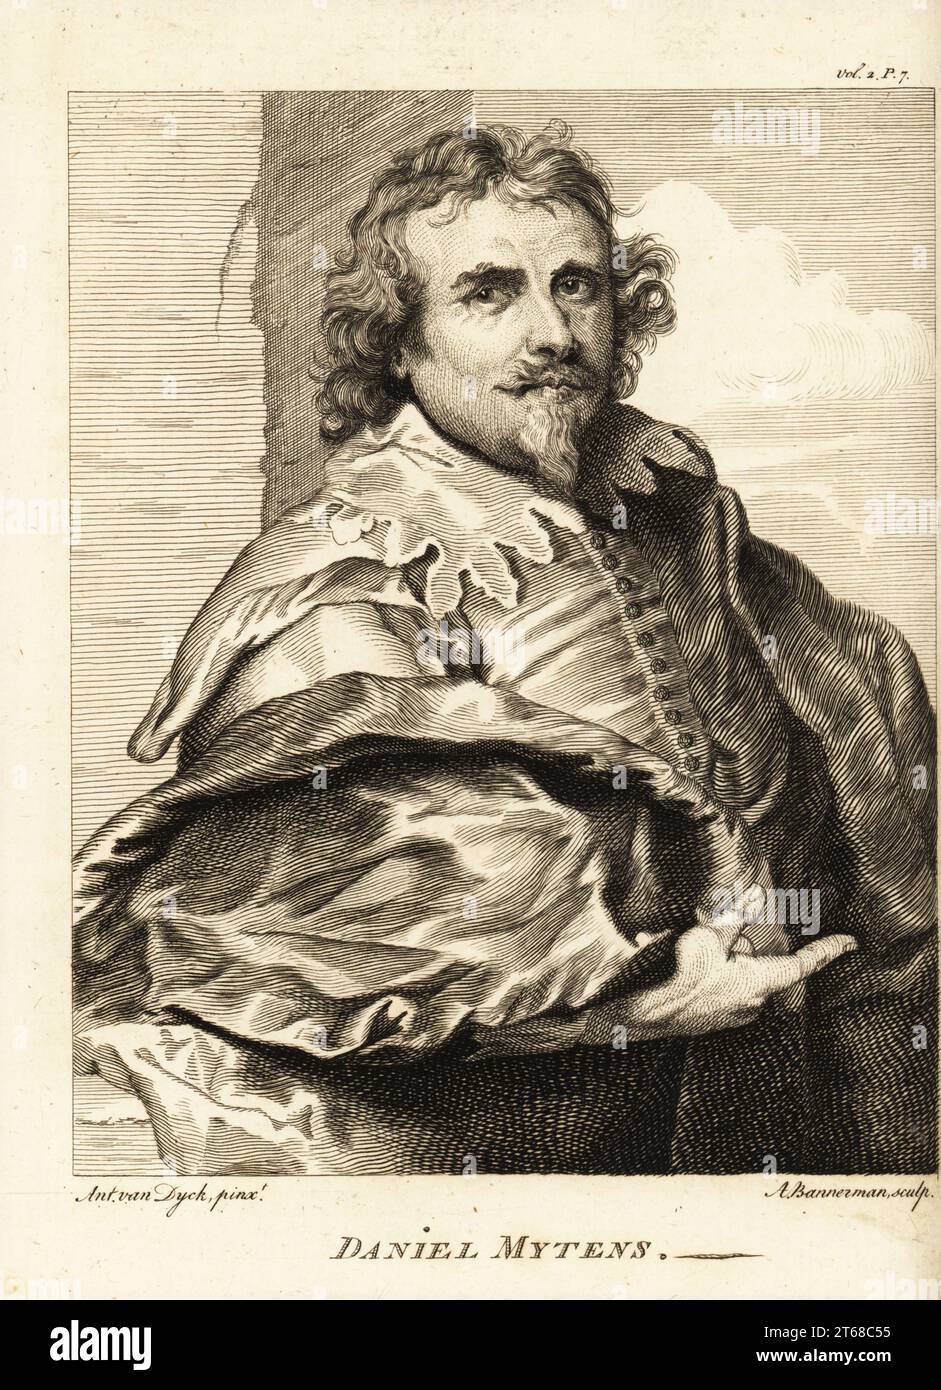 Portrait of Daniel Mytens the Elder or Daniël Mijtens, Dutch portrait painter who worked in England, c.1590-1648. Copperplate engraving by Alexander Bannerman after a portrait by Anthony van Dyck from Horace Walpoles Anecdotes of Painting in England, London, 1765. Stock Photo